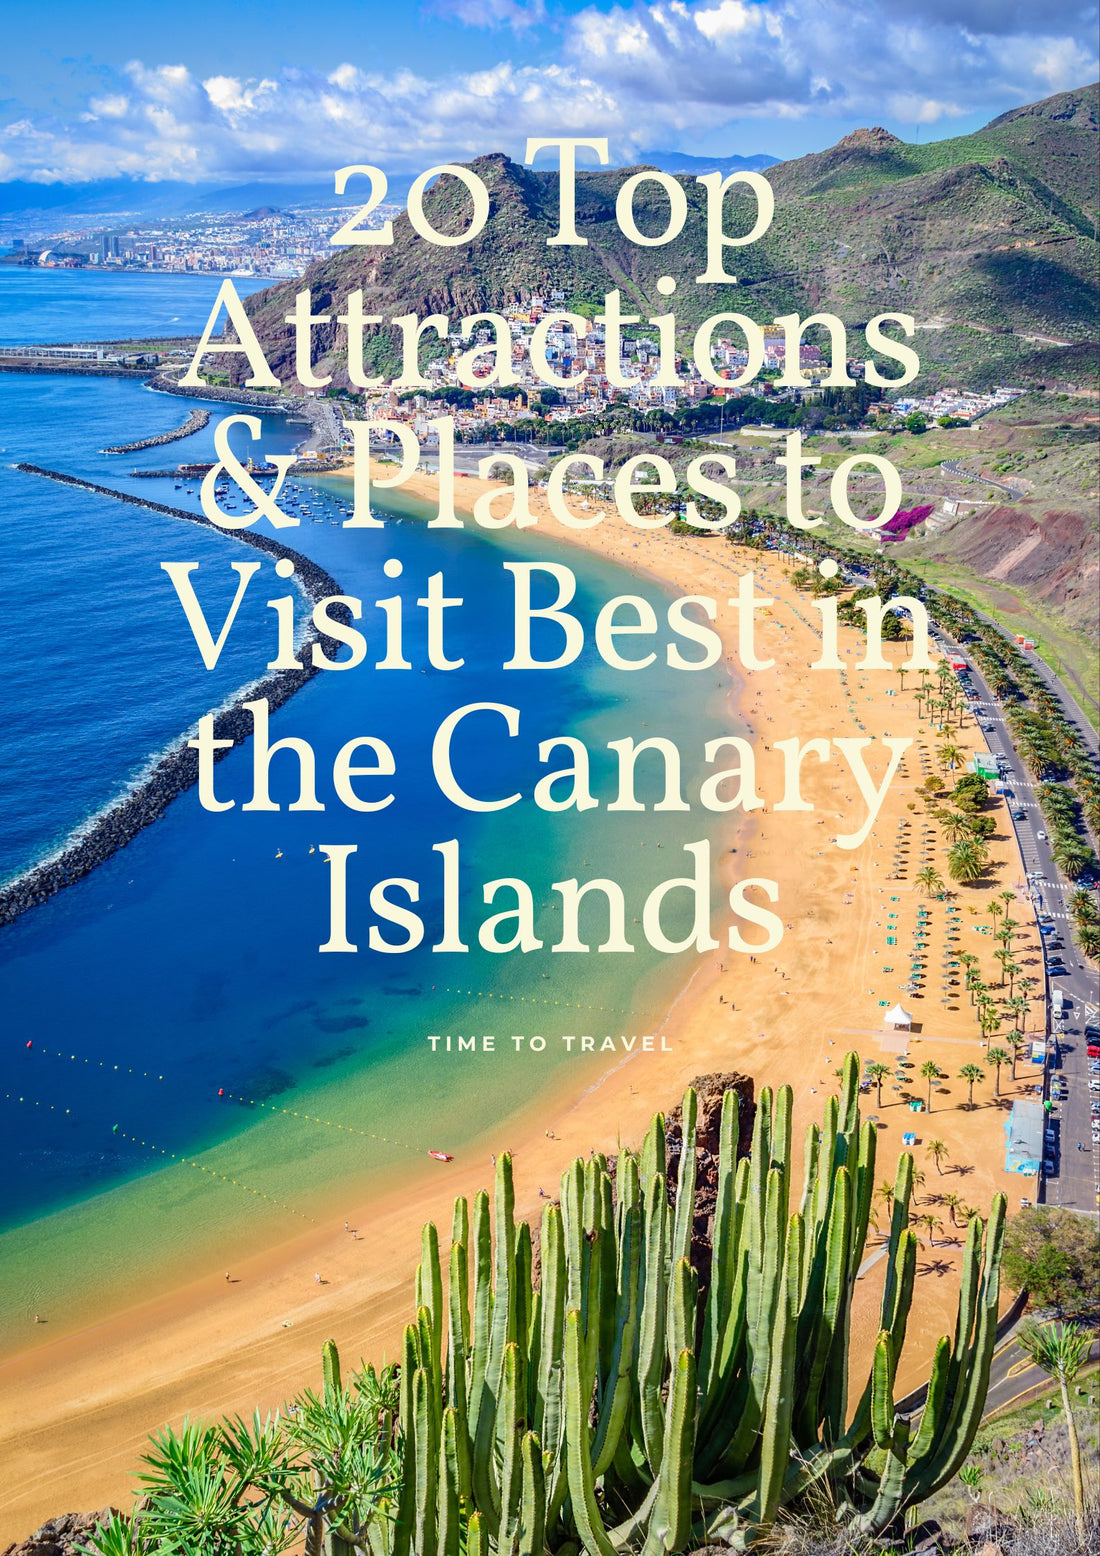 20 Top Attractions to Visit in the Canary Islands